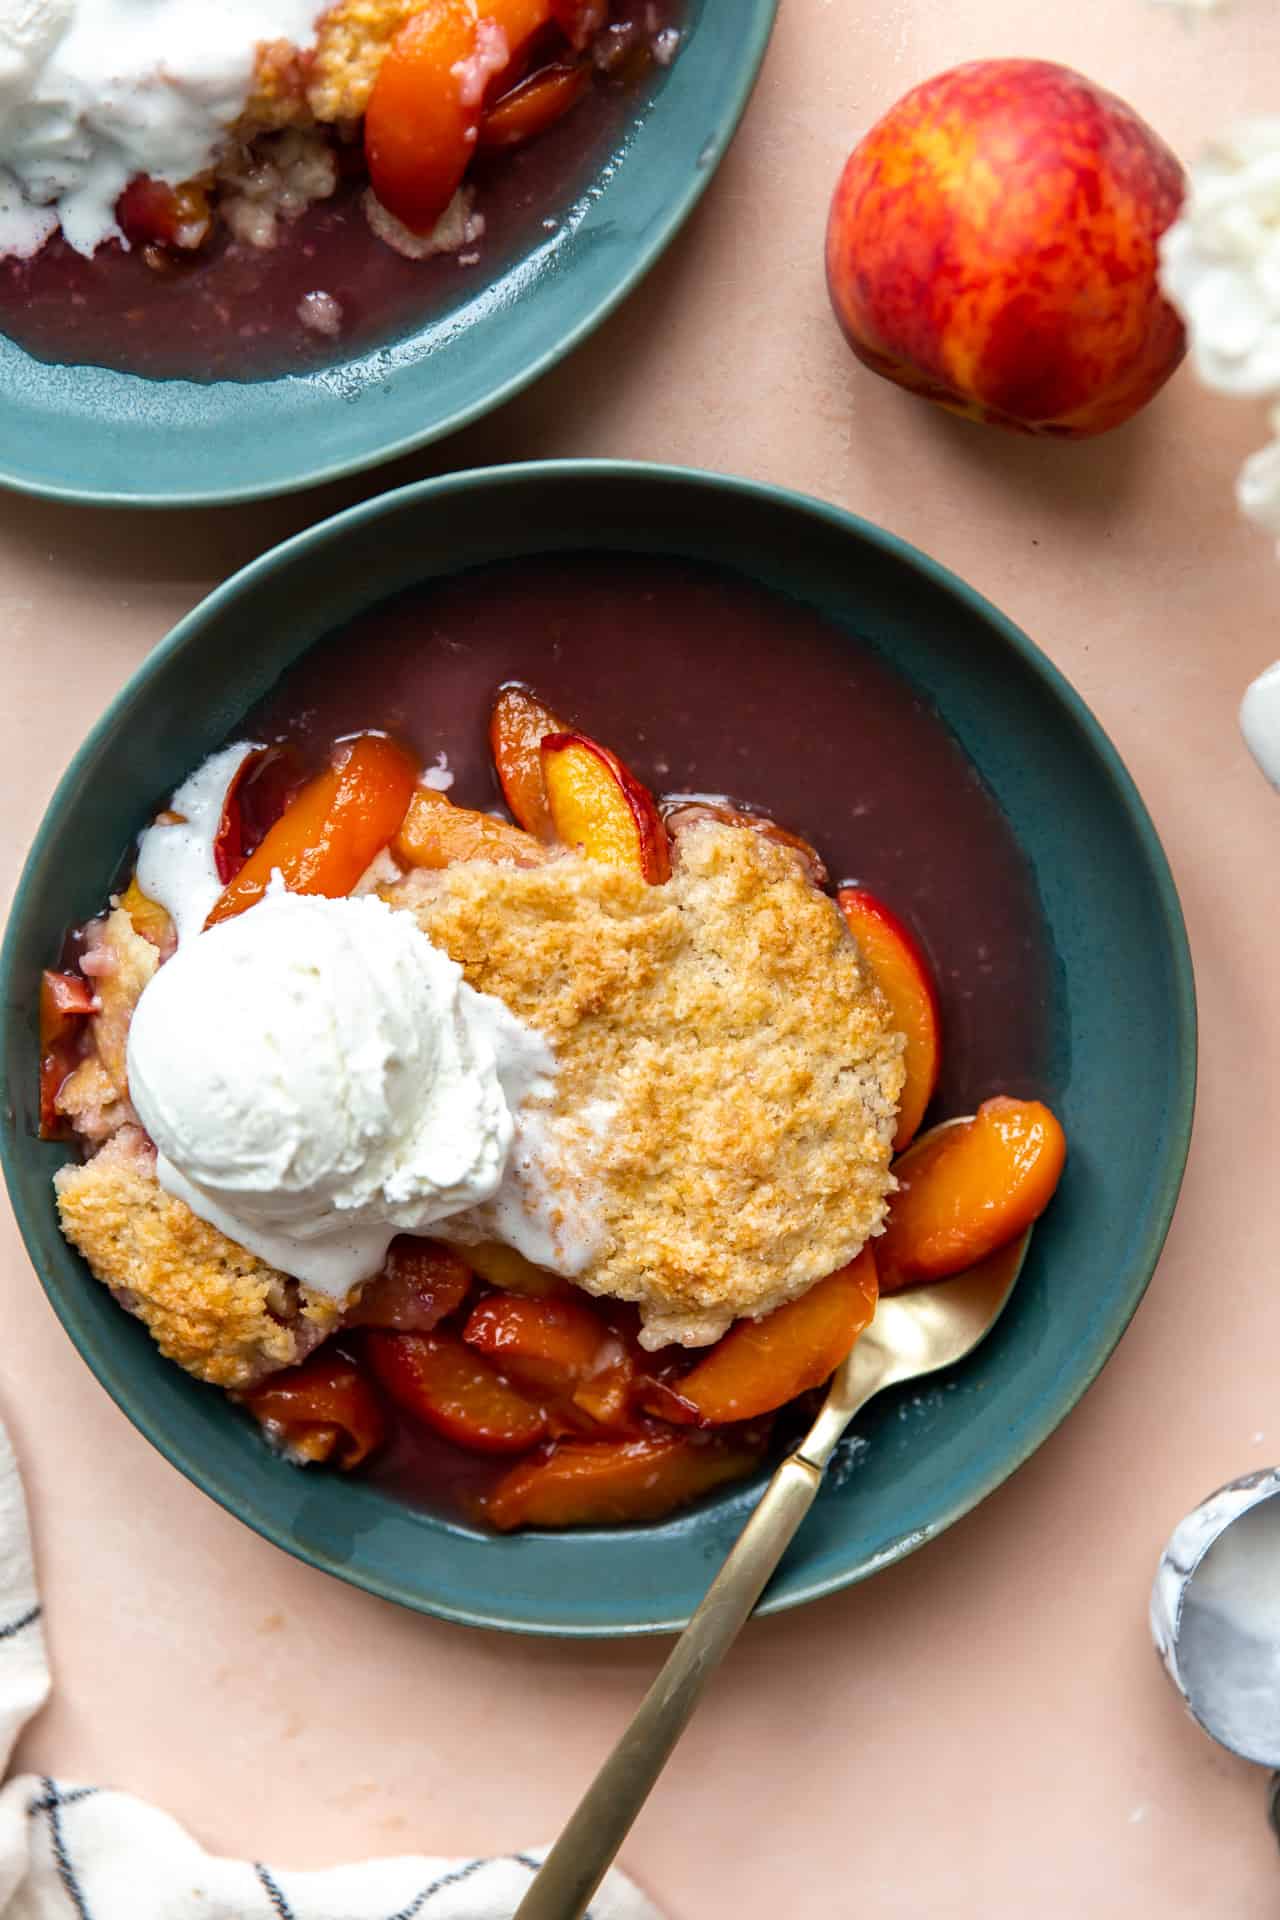 Peach cobbler with a crispy biscuit crust and a scoop of ice cream in a bowl.